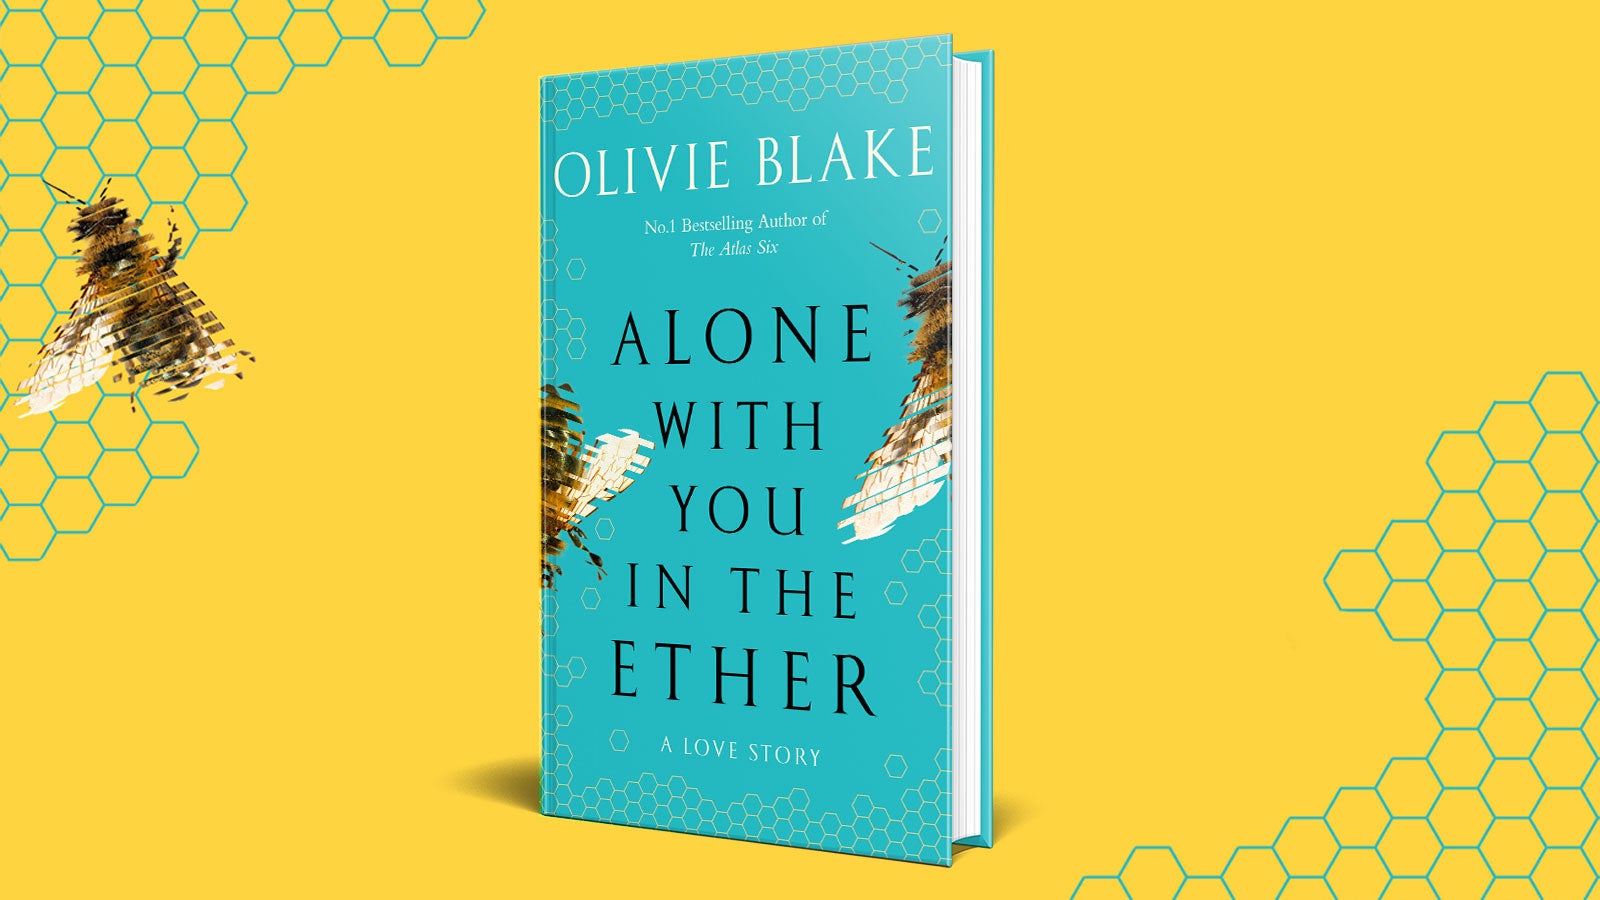 the book cover of Alone With you in the Ether by Olivie Blake - showing the title of the book against a blue background with he image of two pixelated blurry bees on either side. the book sits against a yellow backdrop, which with blue honeycomb patterns and another pixelated bee.